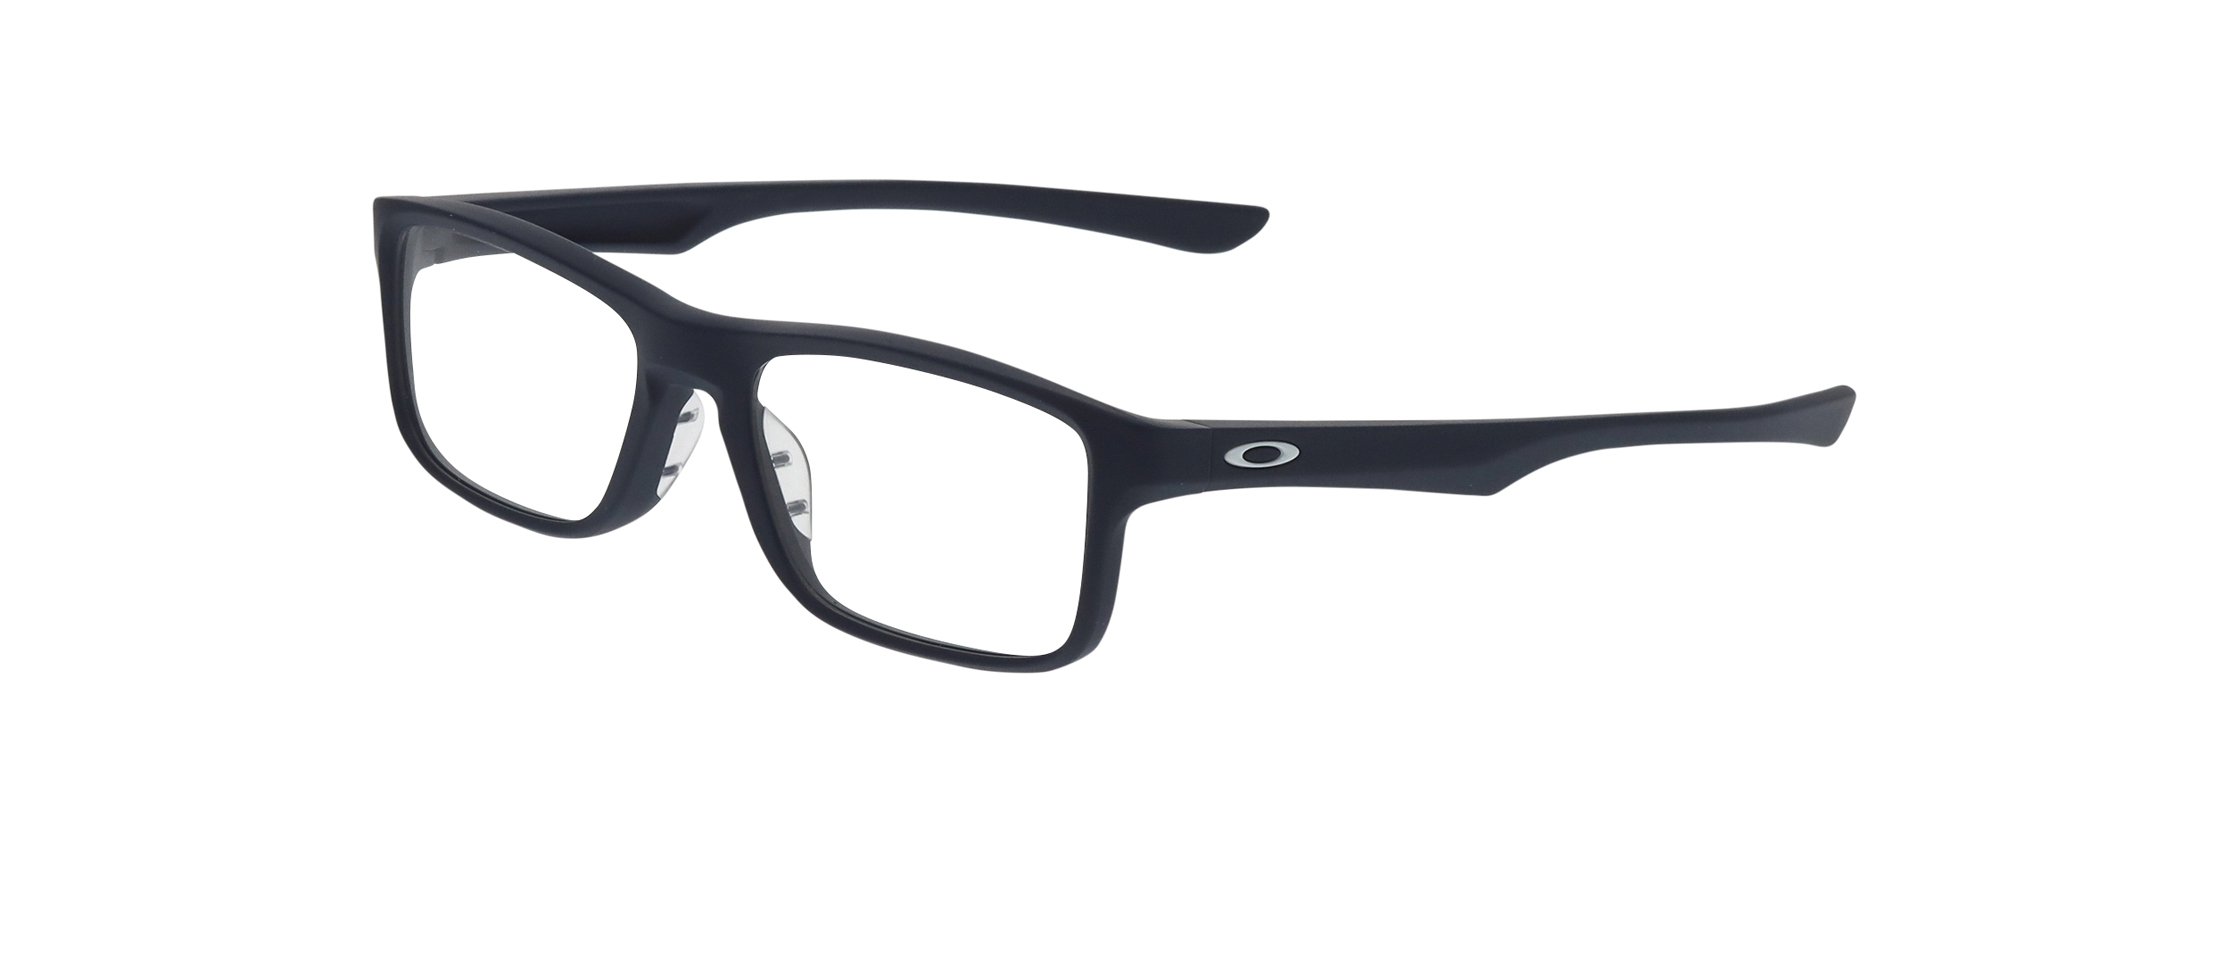 Oakley OX8081 Glasses | Free Shipping and Returns | Eyeconic